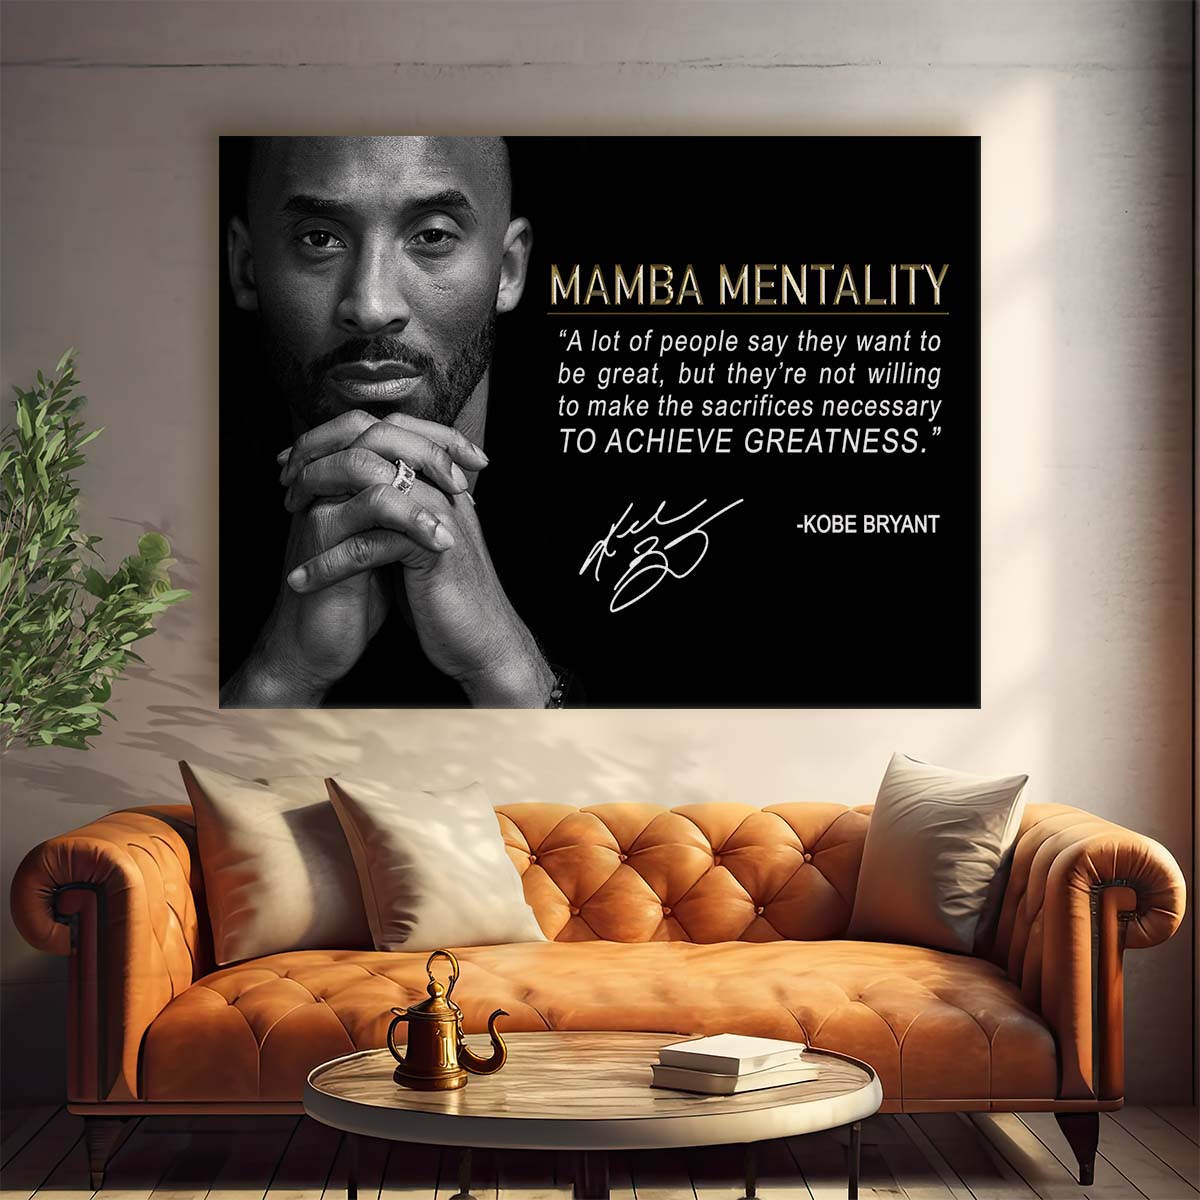 Kobe Bryant Sacrifice To Achieve Greatness Wall Art by Luxuriance Designs. Made in USA.